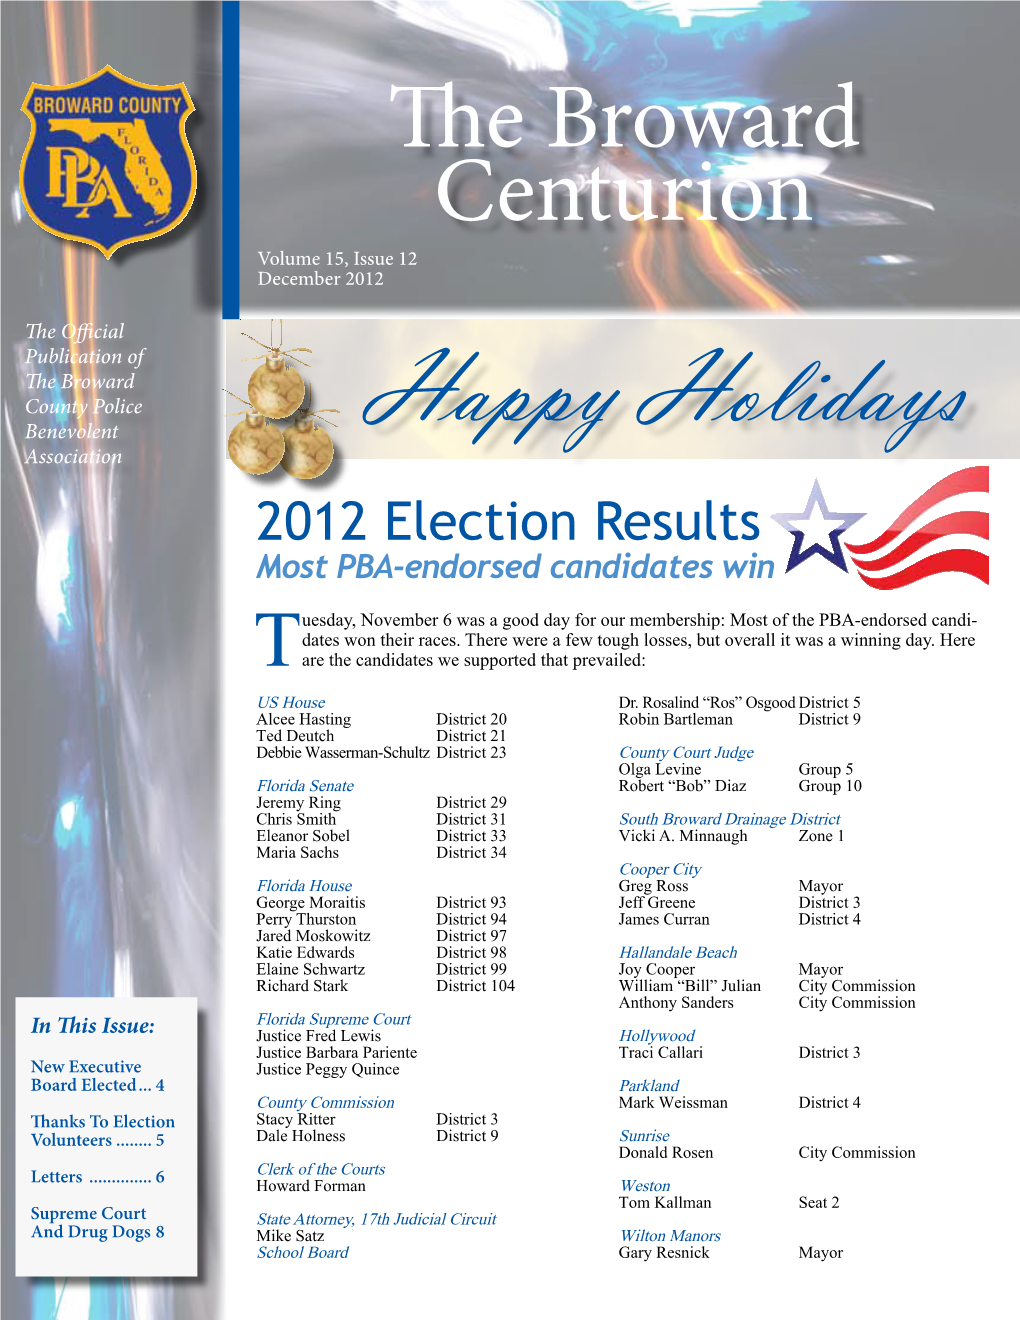 Happy Holidays Association 2012 Election Results Most PBA-Endorsed Candidates Win